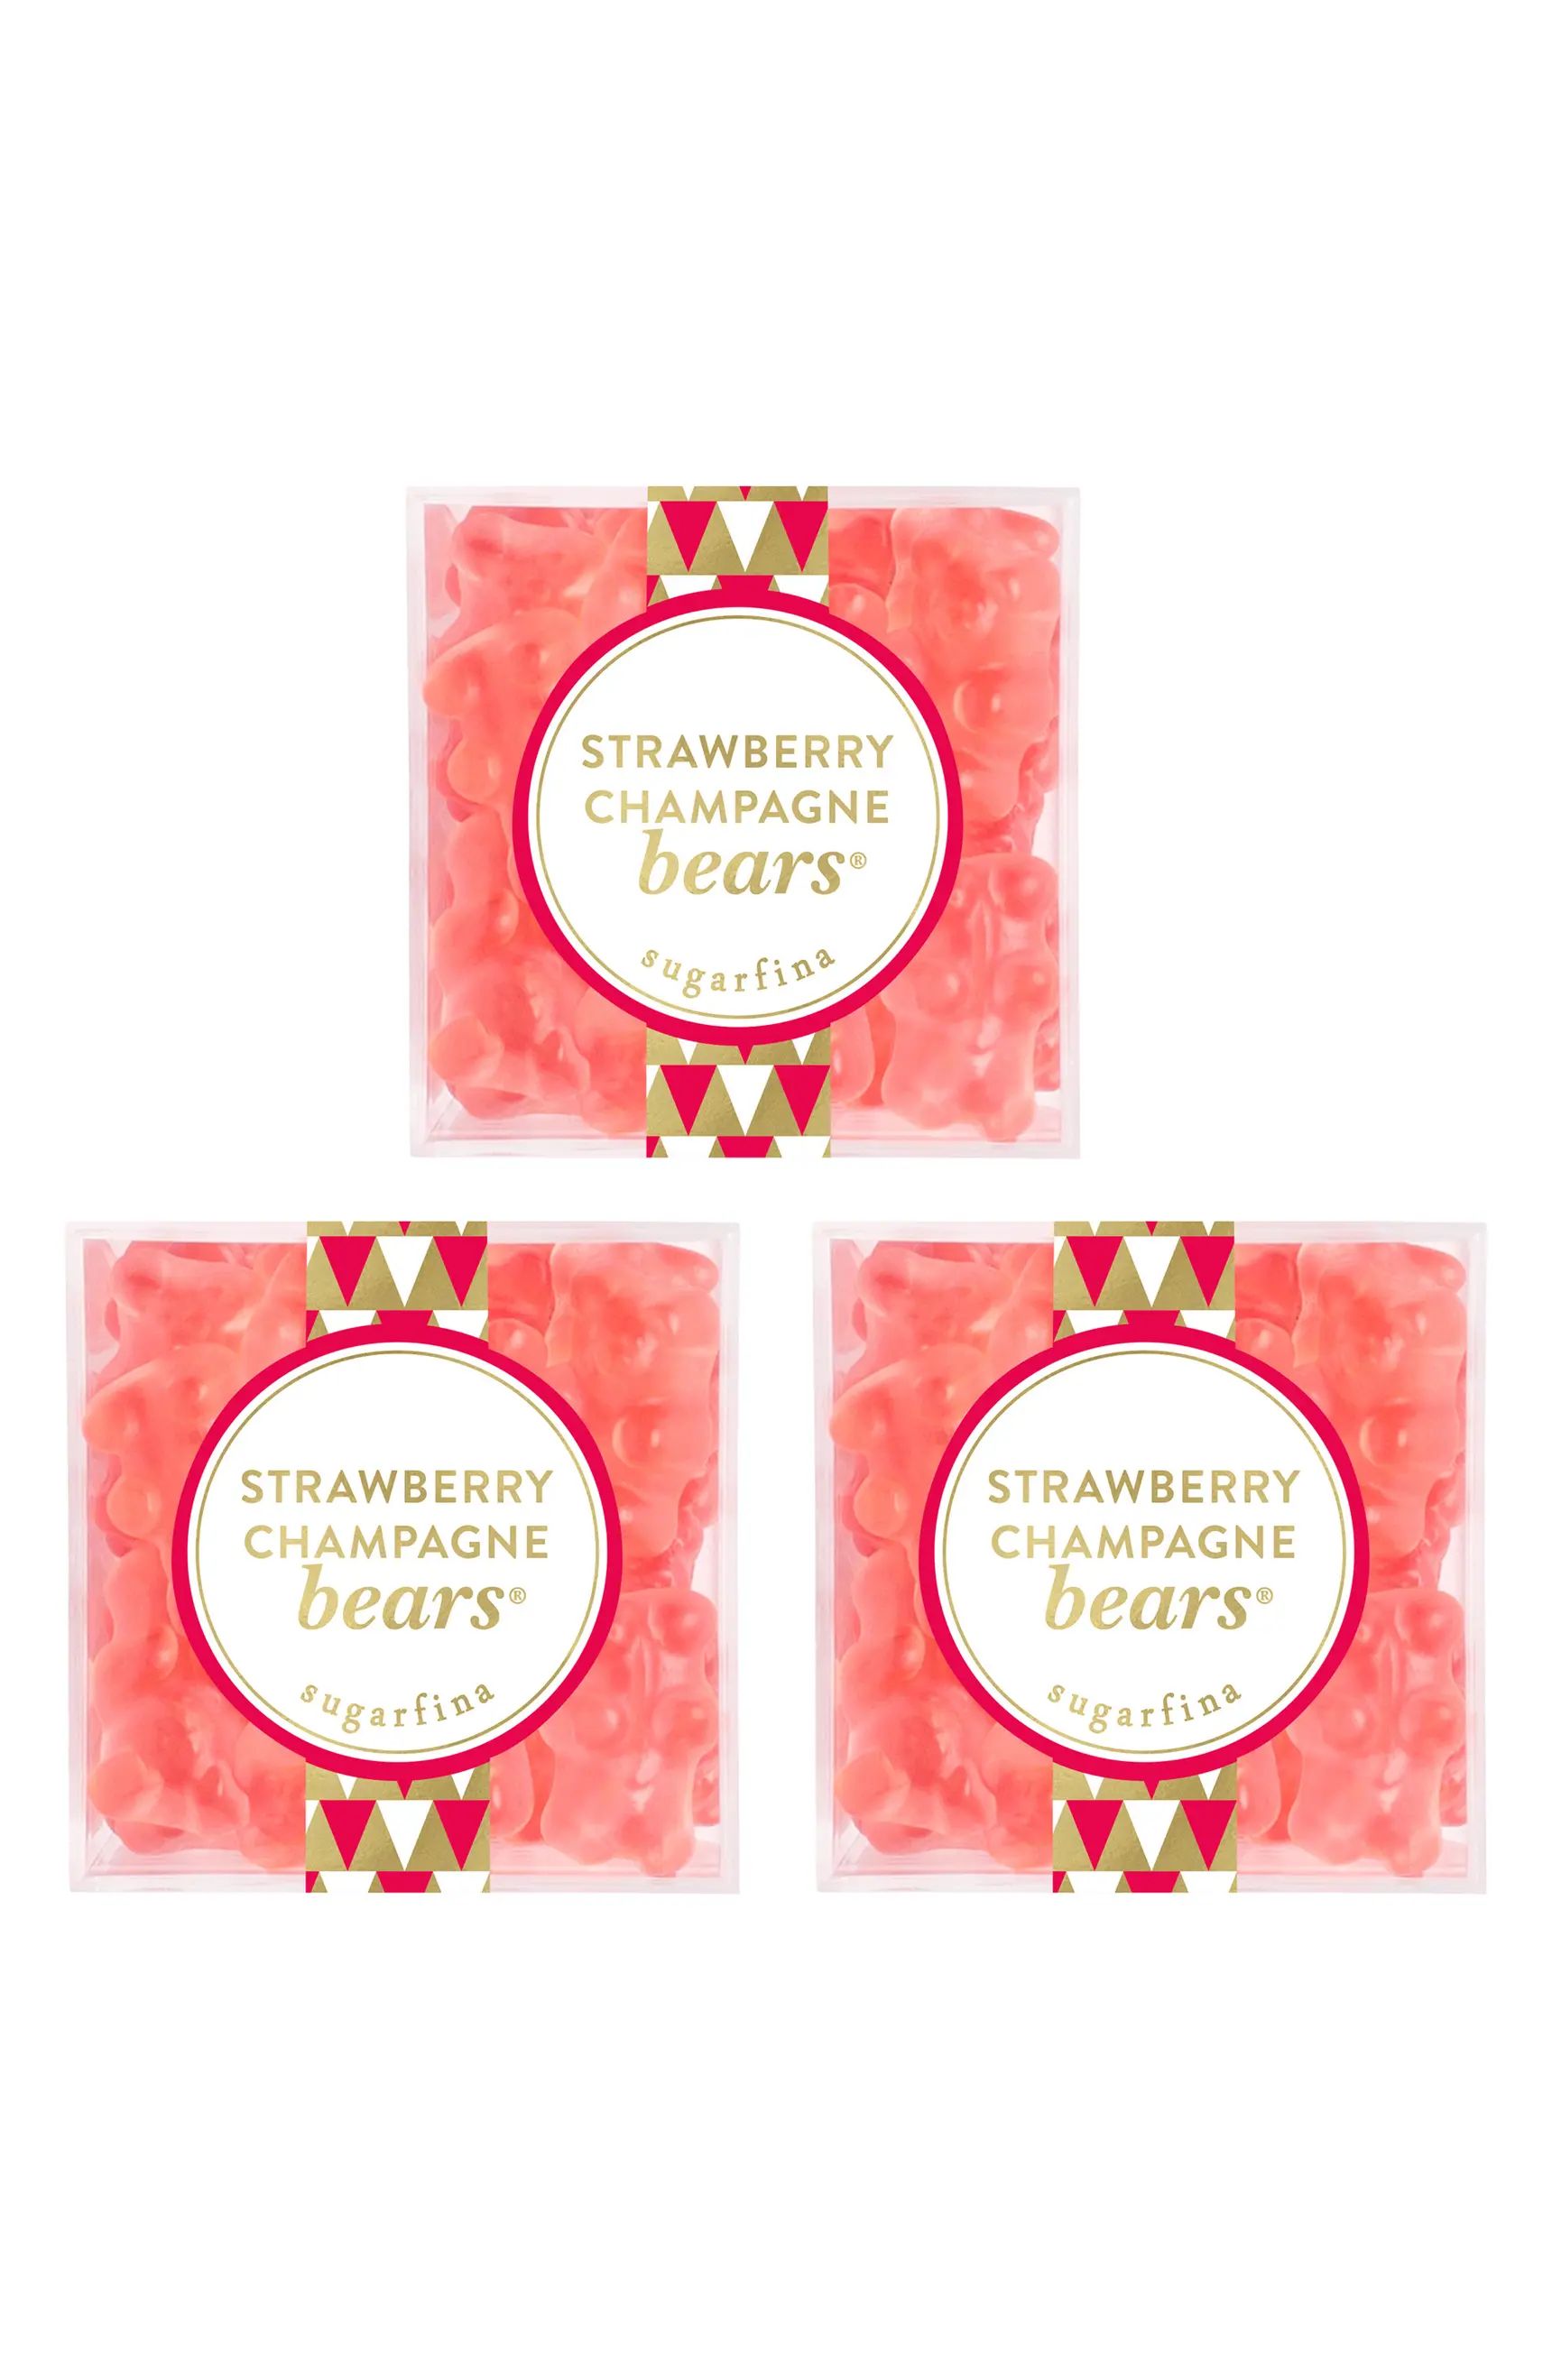 Strawberry Champagne Bears - Set of 3 Cubes | Nordstrom Rack